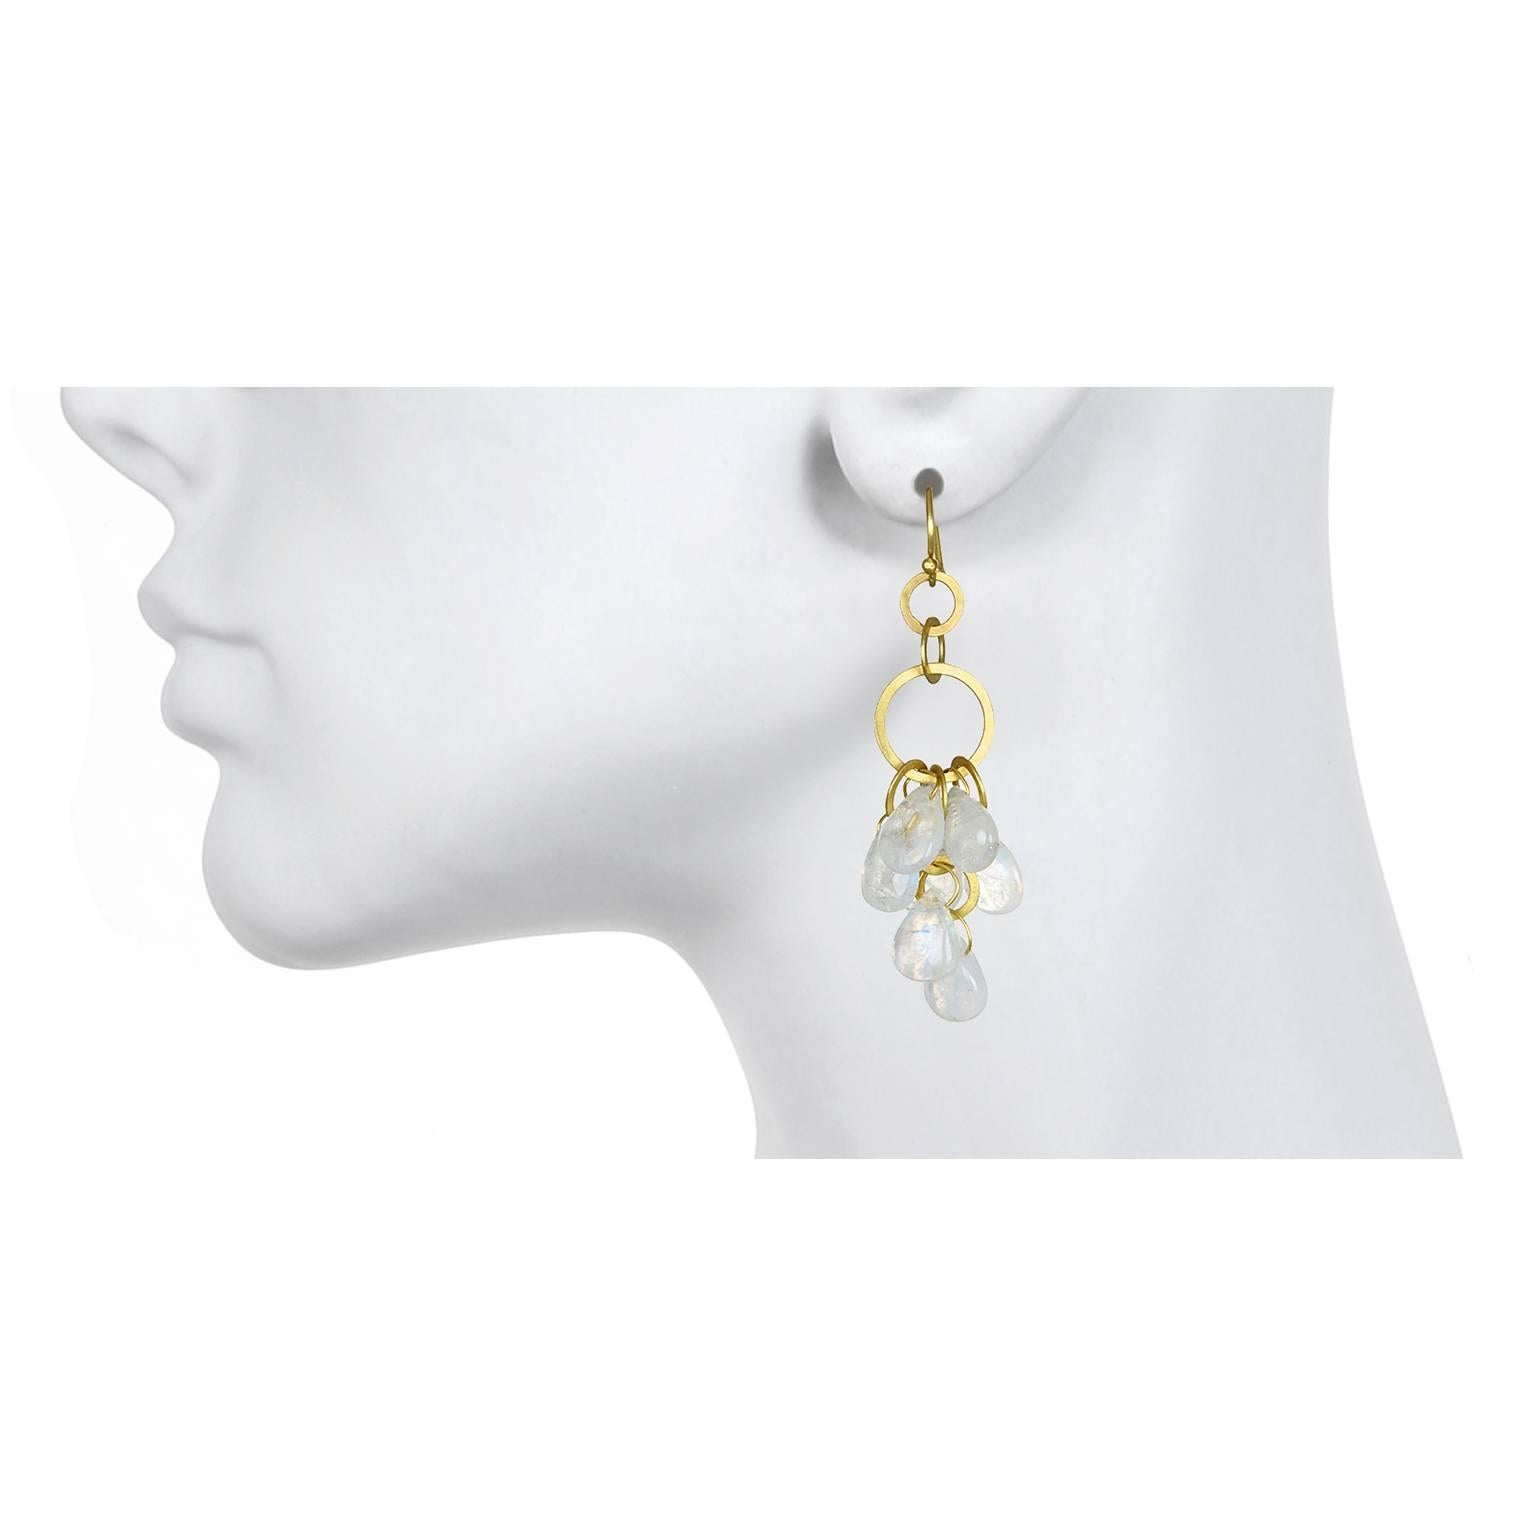 A perennial favorite, Faye Kim's earrings in 18k gold are handmade with shimmering moonstone briolettes.  Fun and versatile, moonstones are easy to pair with other colors and can easily go from day to evening. French ear wires. Matte